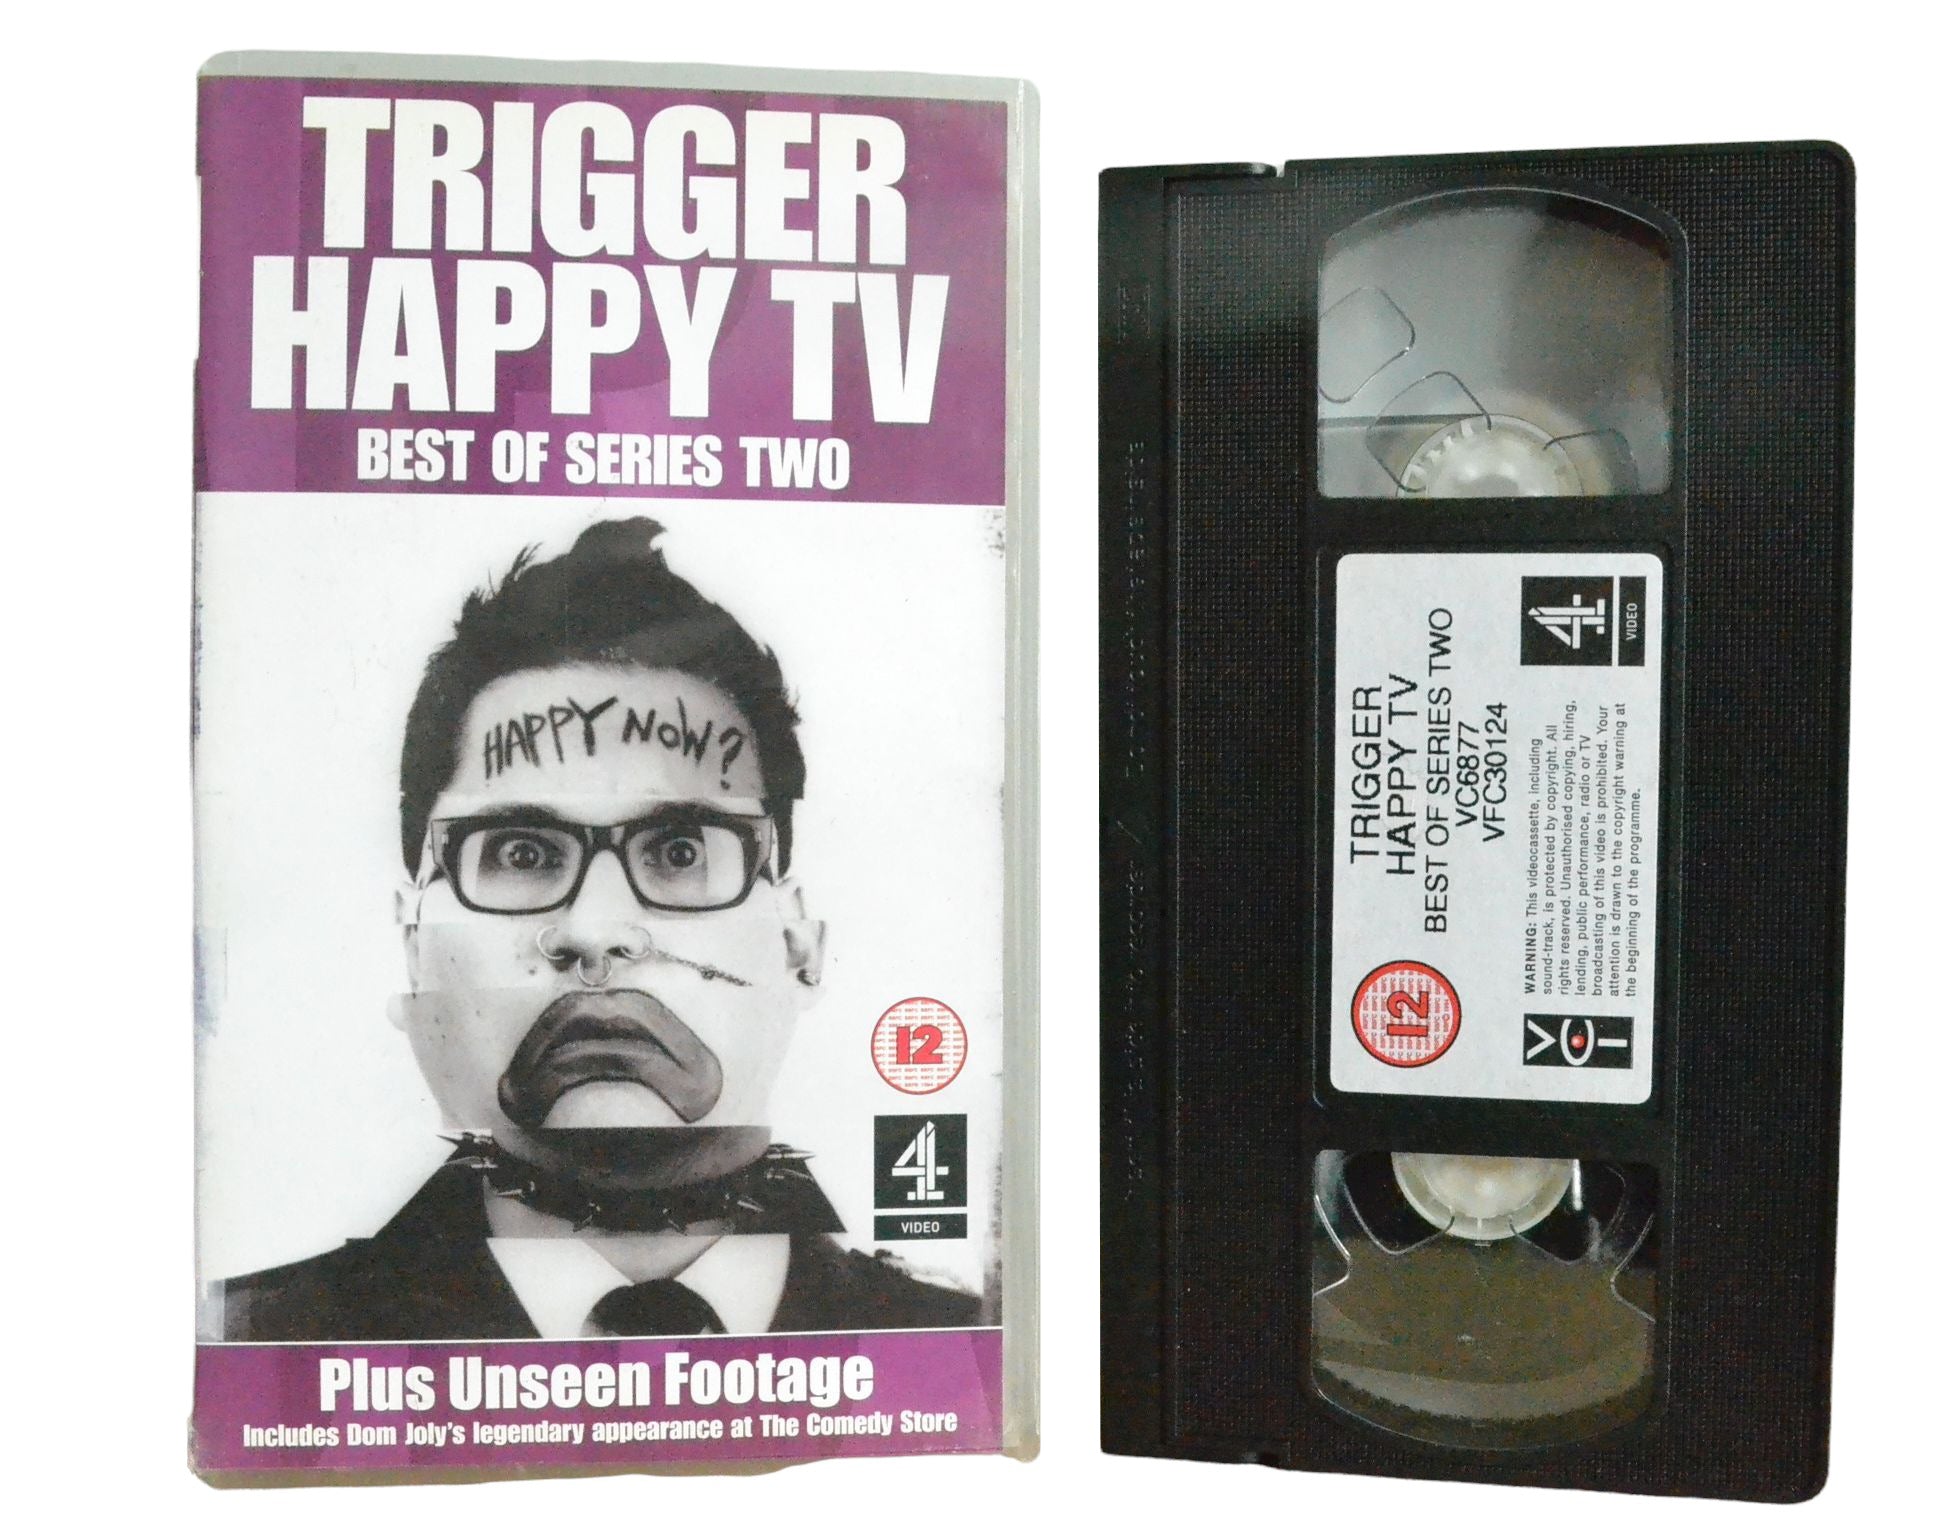 Trigger Happy TV - Best of Series Two - Dom Joly - 4 Video - Comedy - Pal VHS-